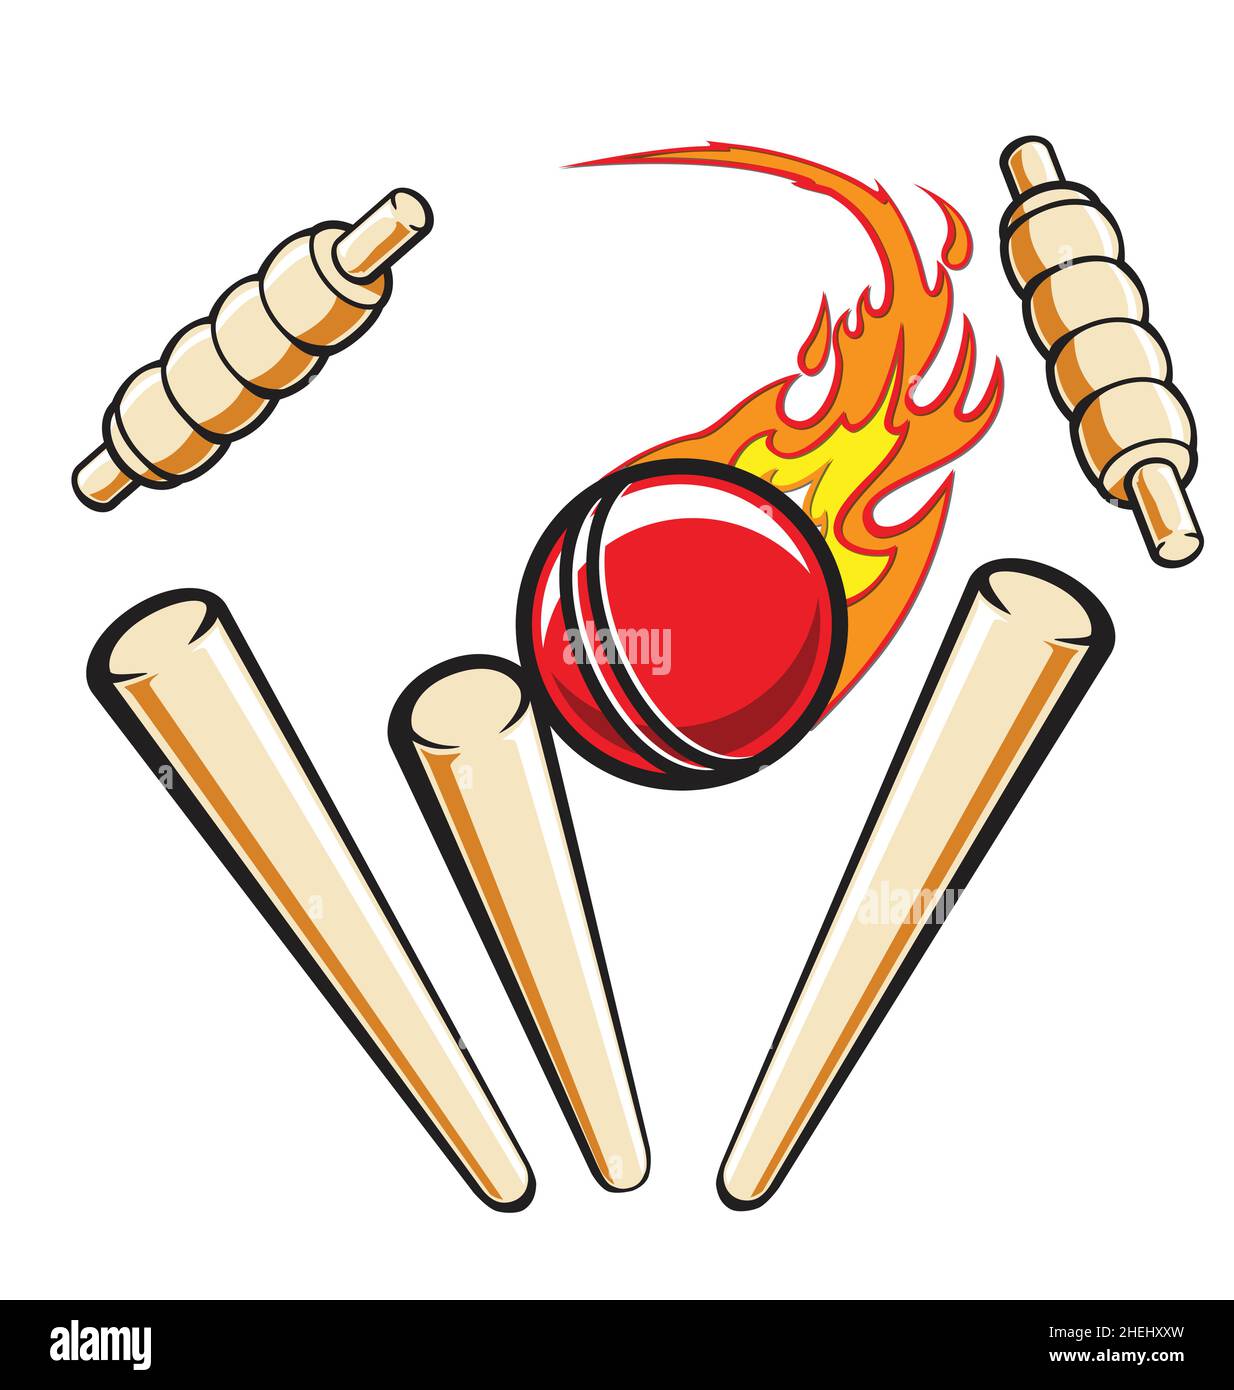 Cricket wicket stumps hit by fast flaming red ball bowled out vector isolated on white background Stock Vector